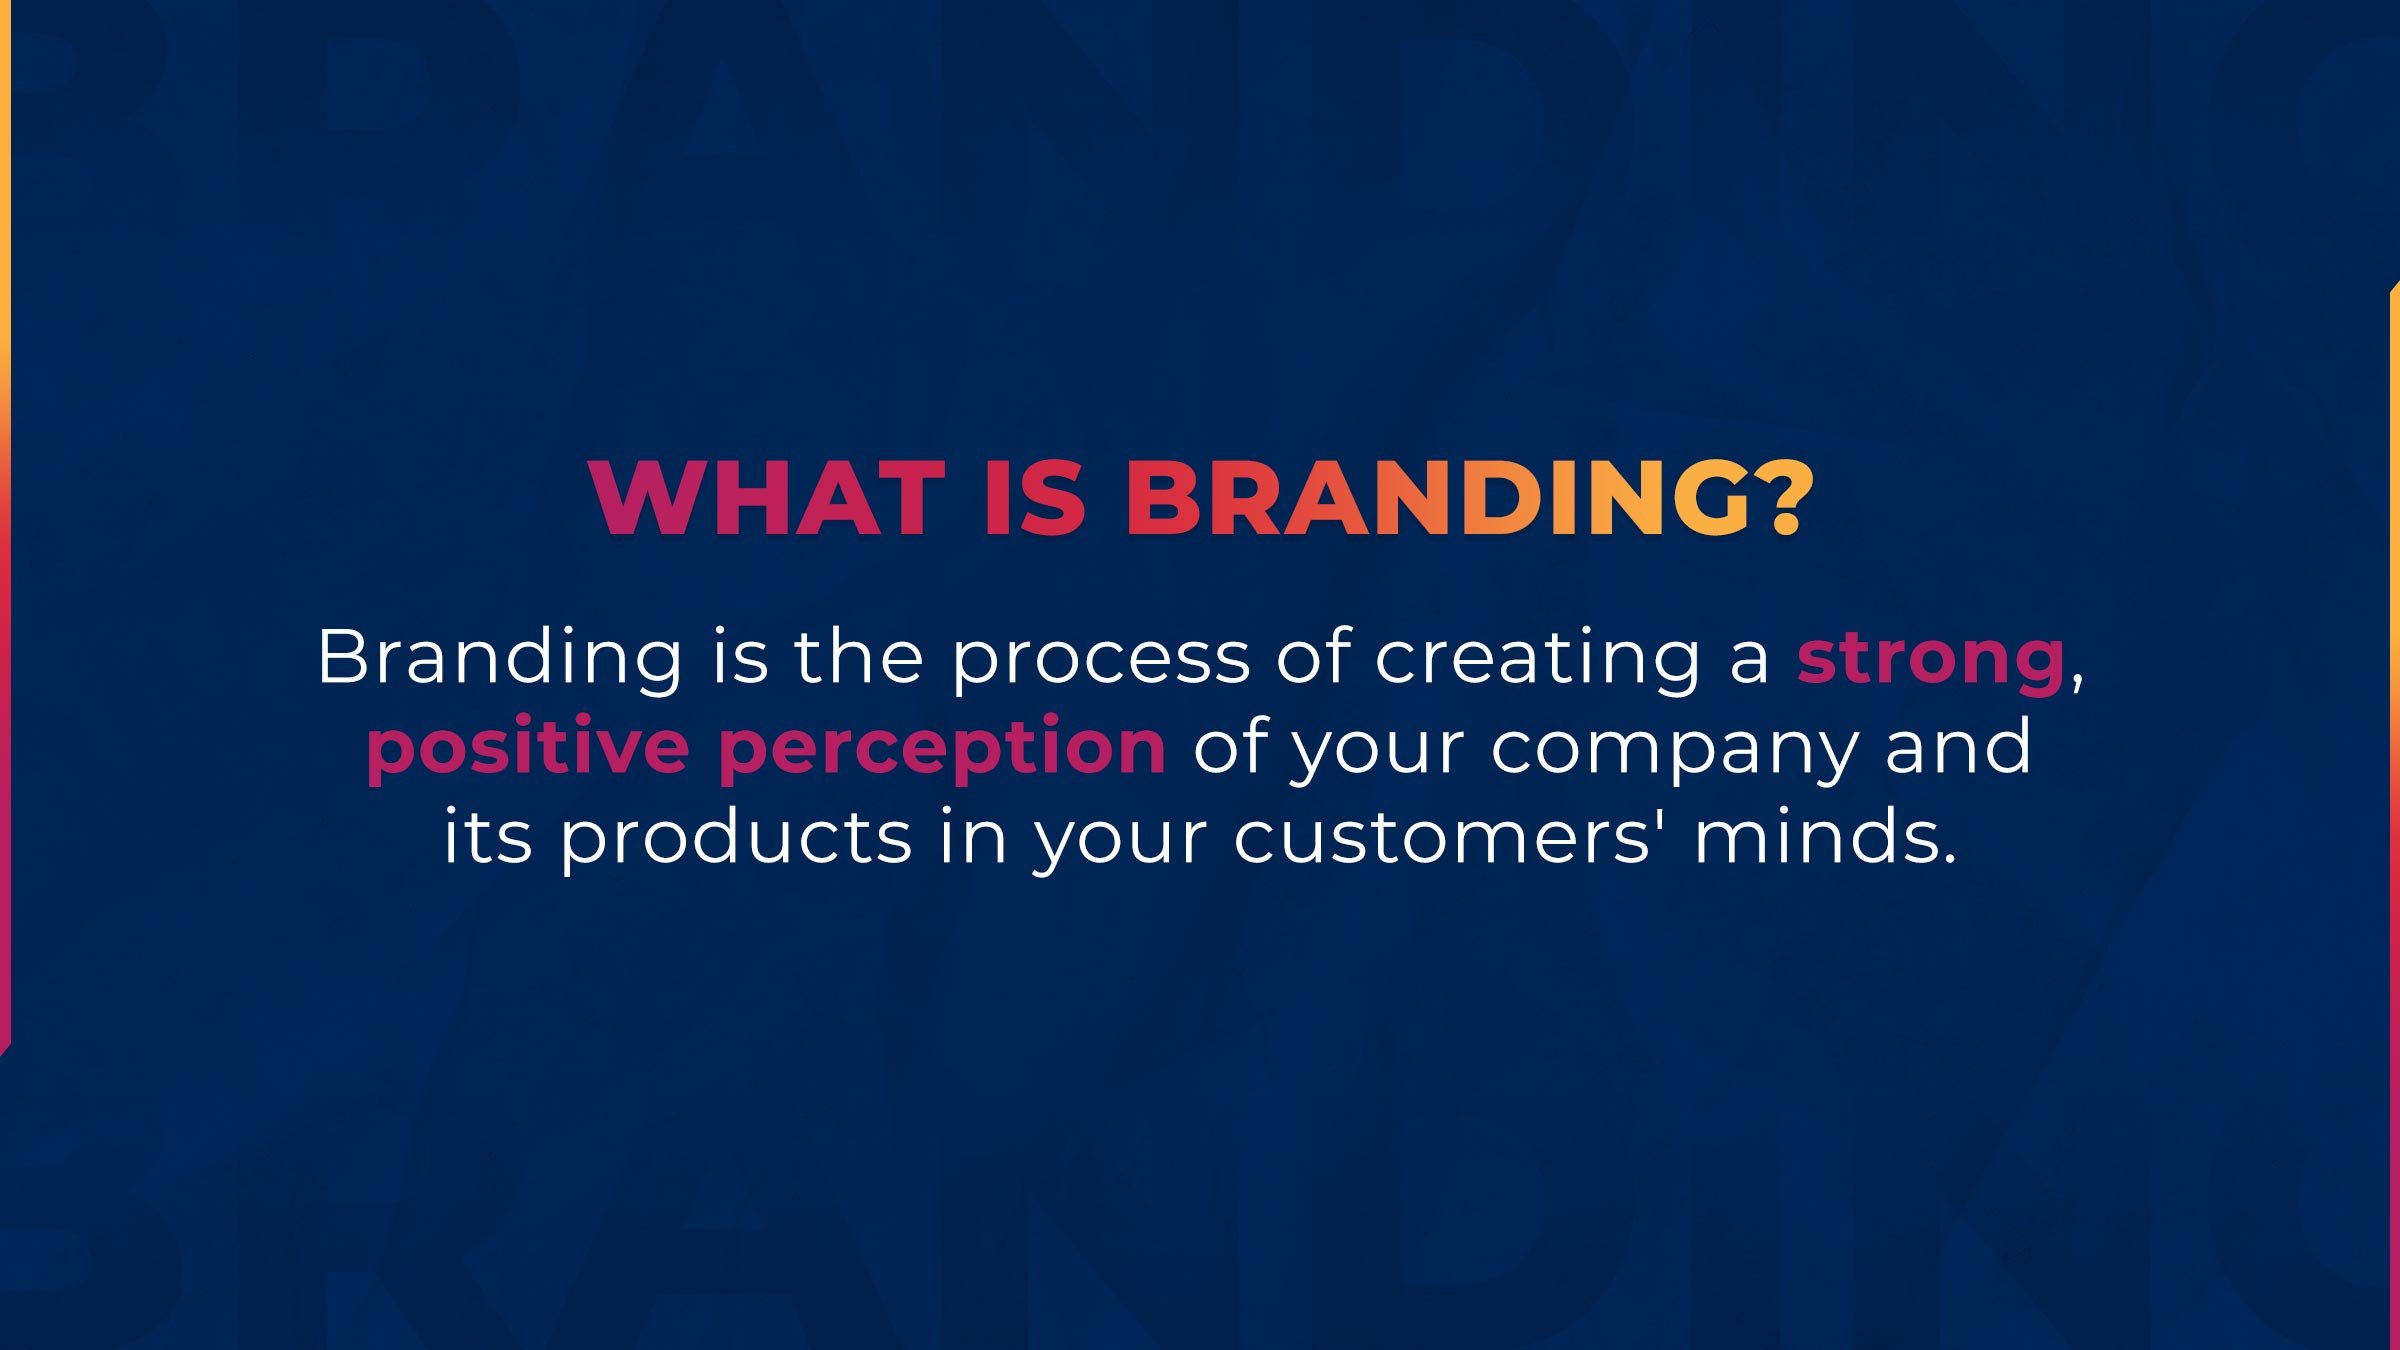 What is branding? Branding is the process of creating a strong, positive perception of your company and its products in your customers' minds.